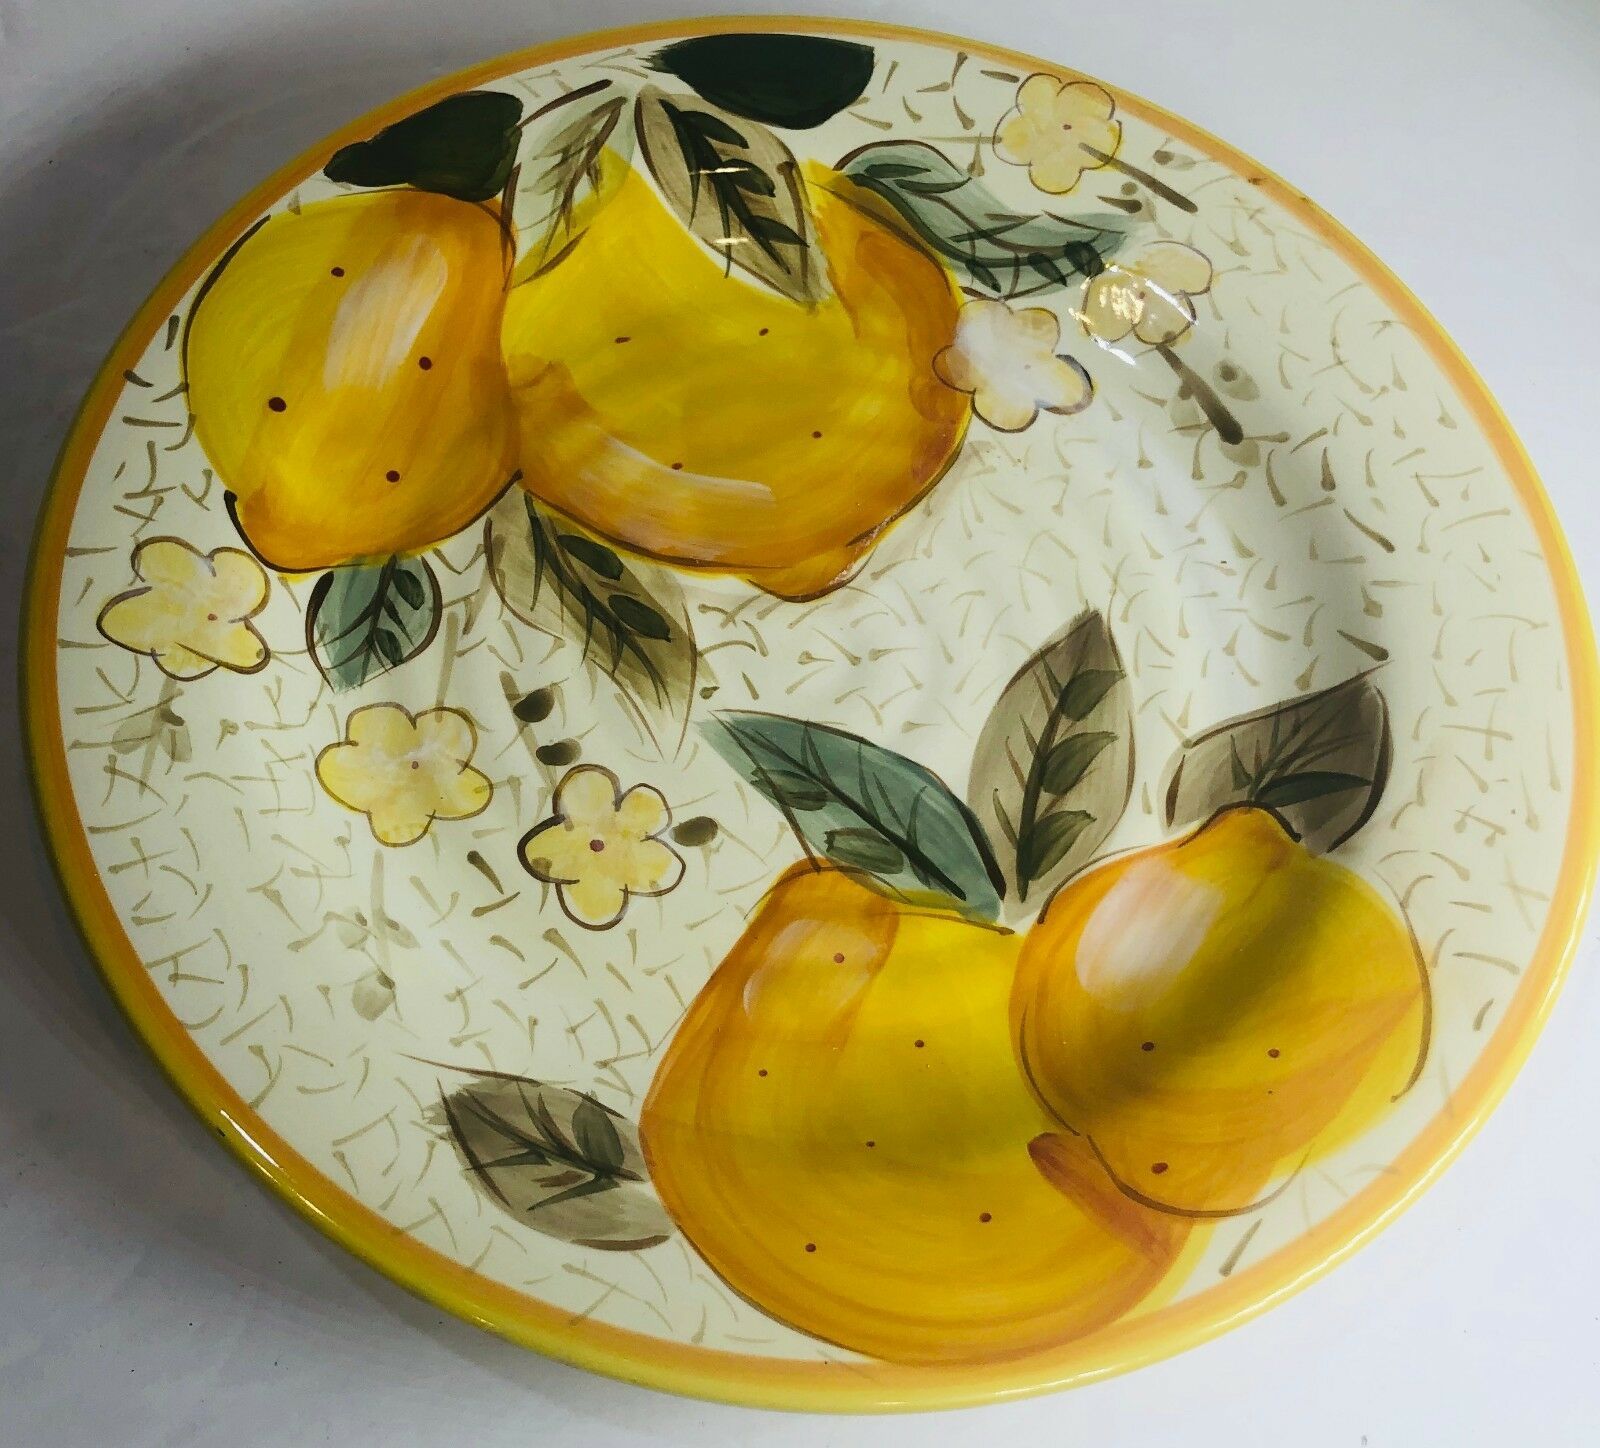 Gibson Designs " LEMON COURTYARD" Dinnerware Hand Painted Collection - $11.88 - $17.82